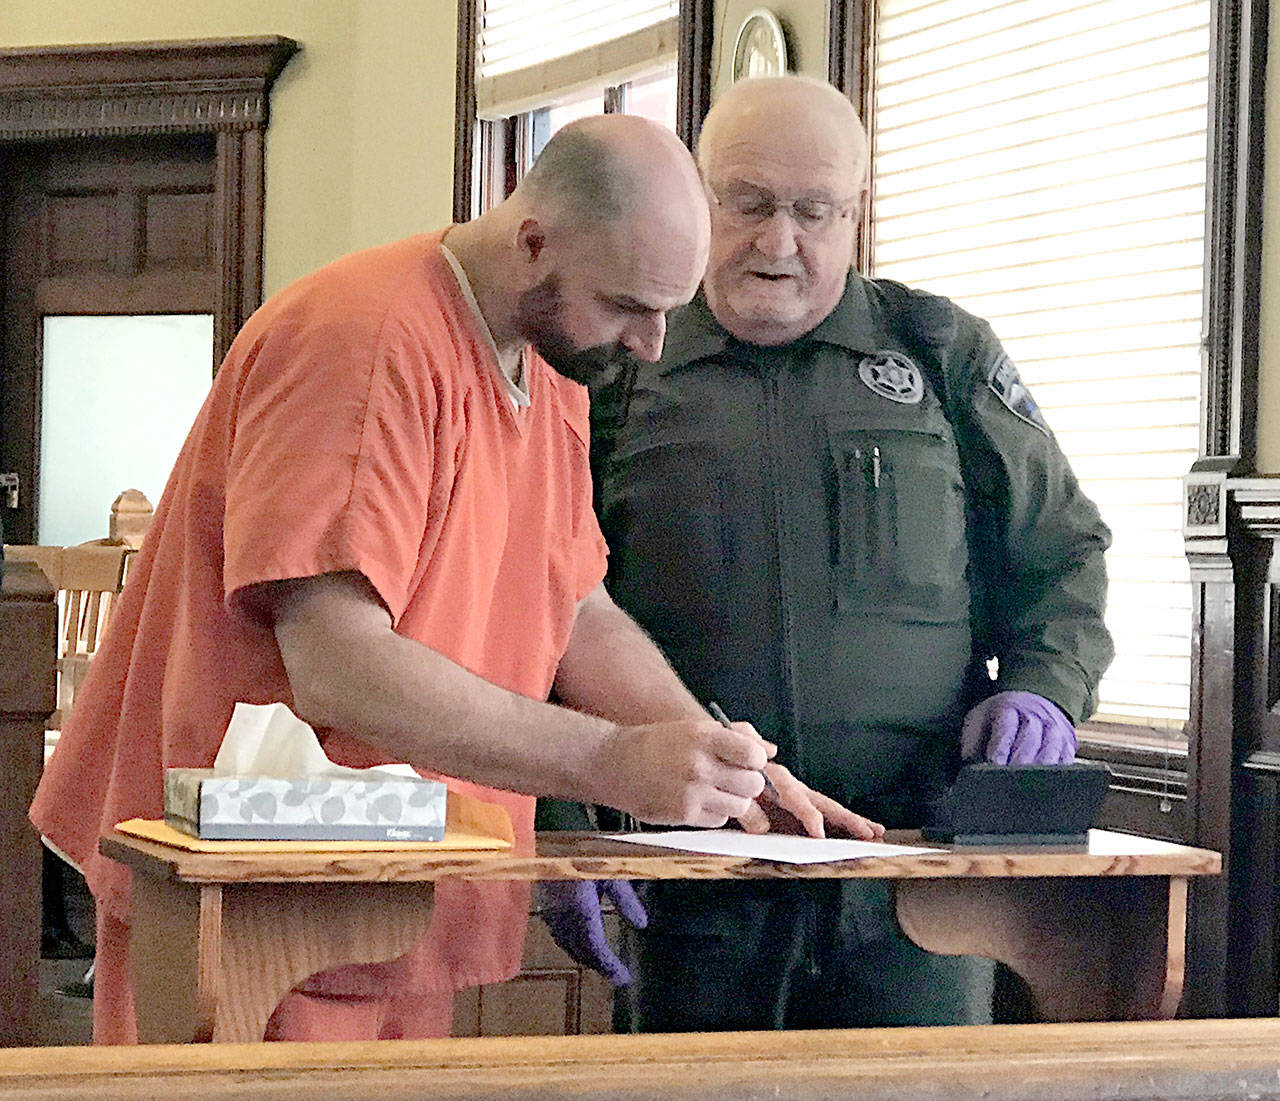 Joel Robert Chaudoin, 43, was sentenced to 50 months in prison in Jefferson County Superior Court. He pleaded guilty Nov. 1 to residential burglary, possession of heroin and violating a no-contact order. (Brian McLean/Peninsula Daily News)